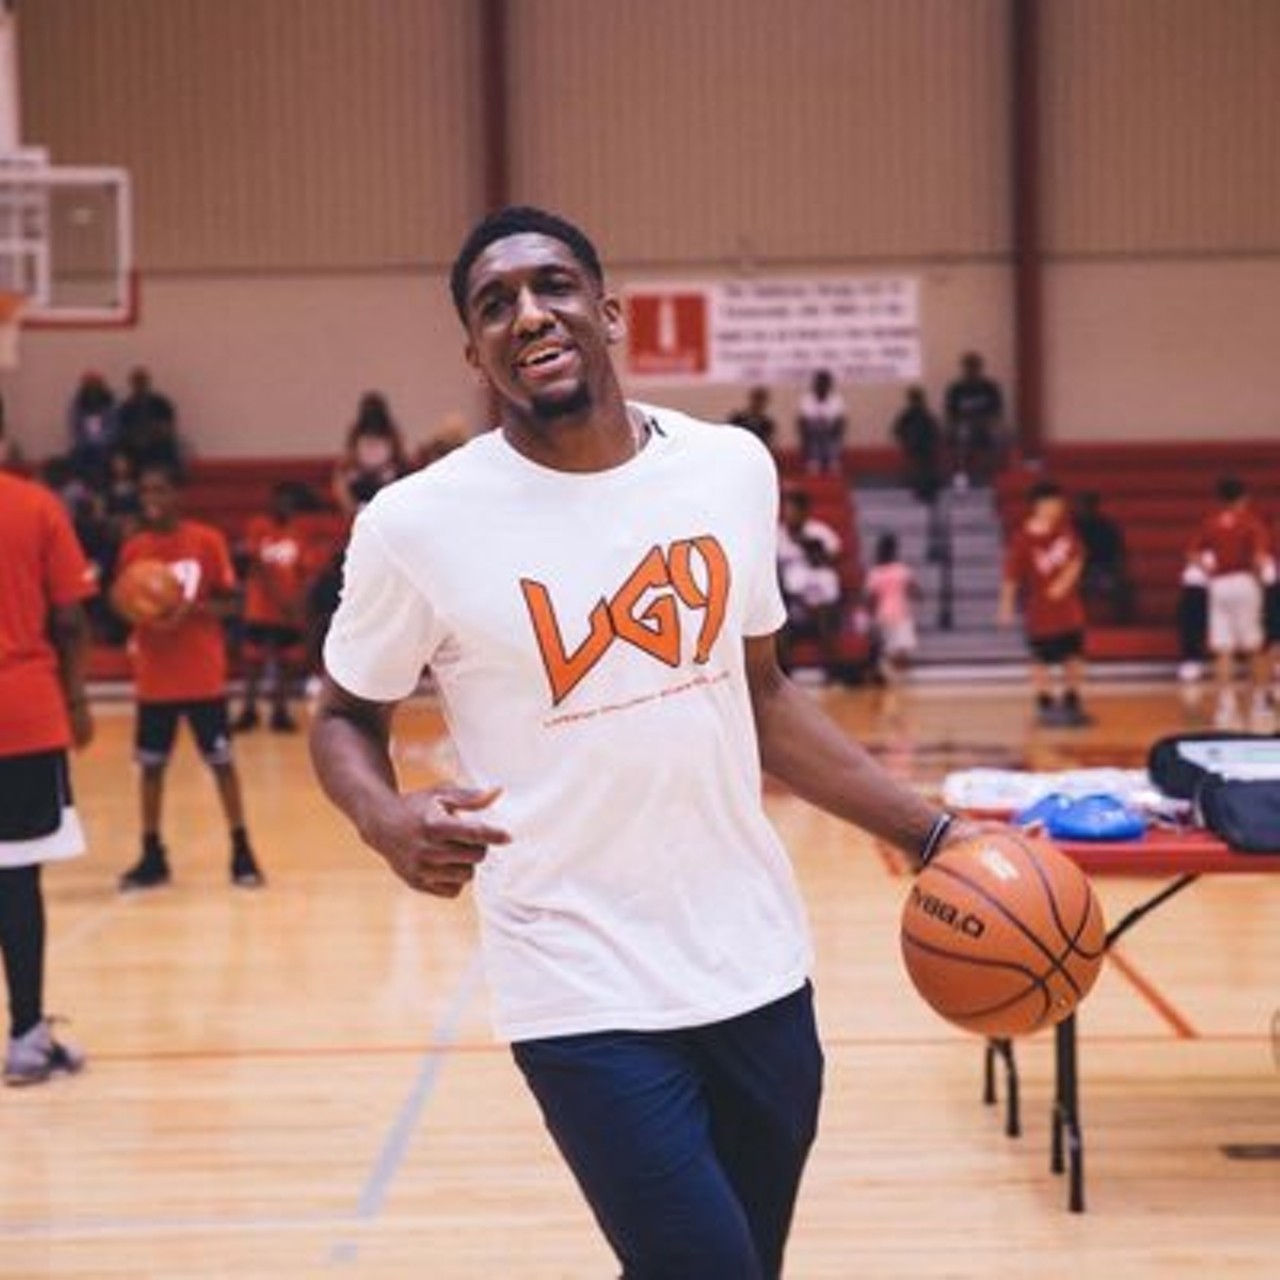 Langston Galloway
Photo via Twitter
Langston Galloway is a basketball player who played for the Detroit Pistons from 2017 to 2020. Galloway reached the NBA finals in July while playing for the Phoenix Suns.
cameo.com/lgkicks